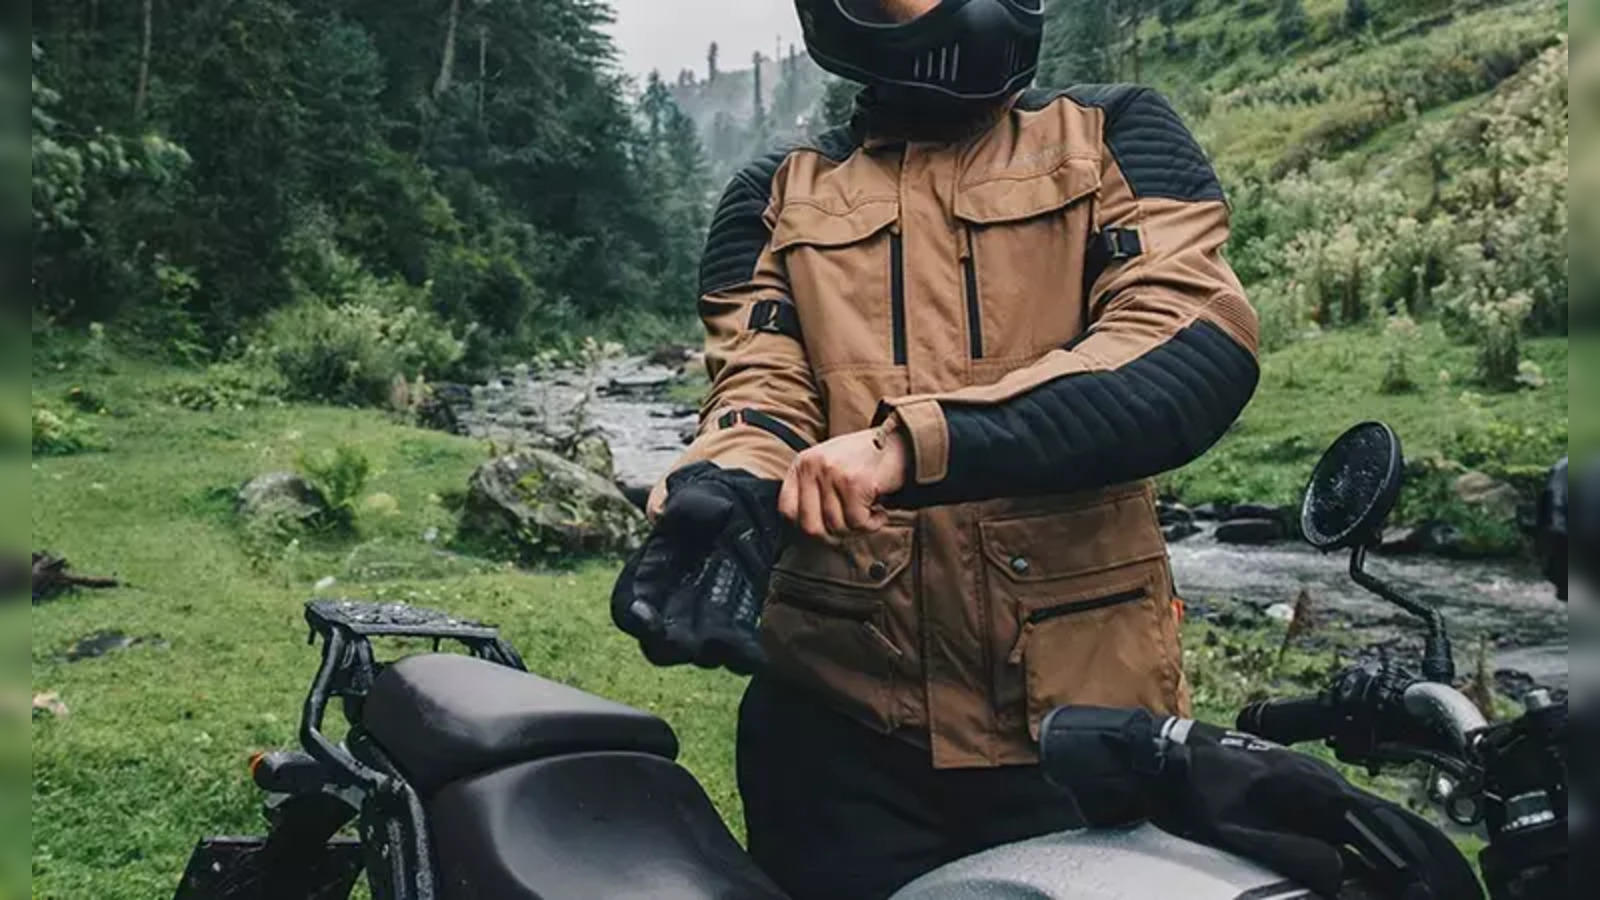 AXOR #RIDING JACKET UNDER ONLY 6000 | BEST LEVEL 2 RIDING JACKET | DETAILED  REVIEW - YouTube